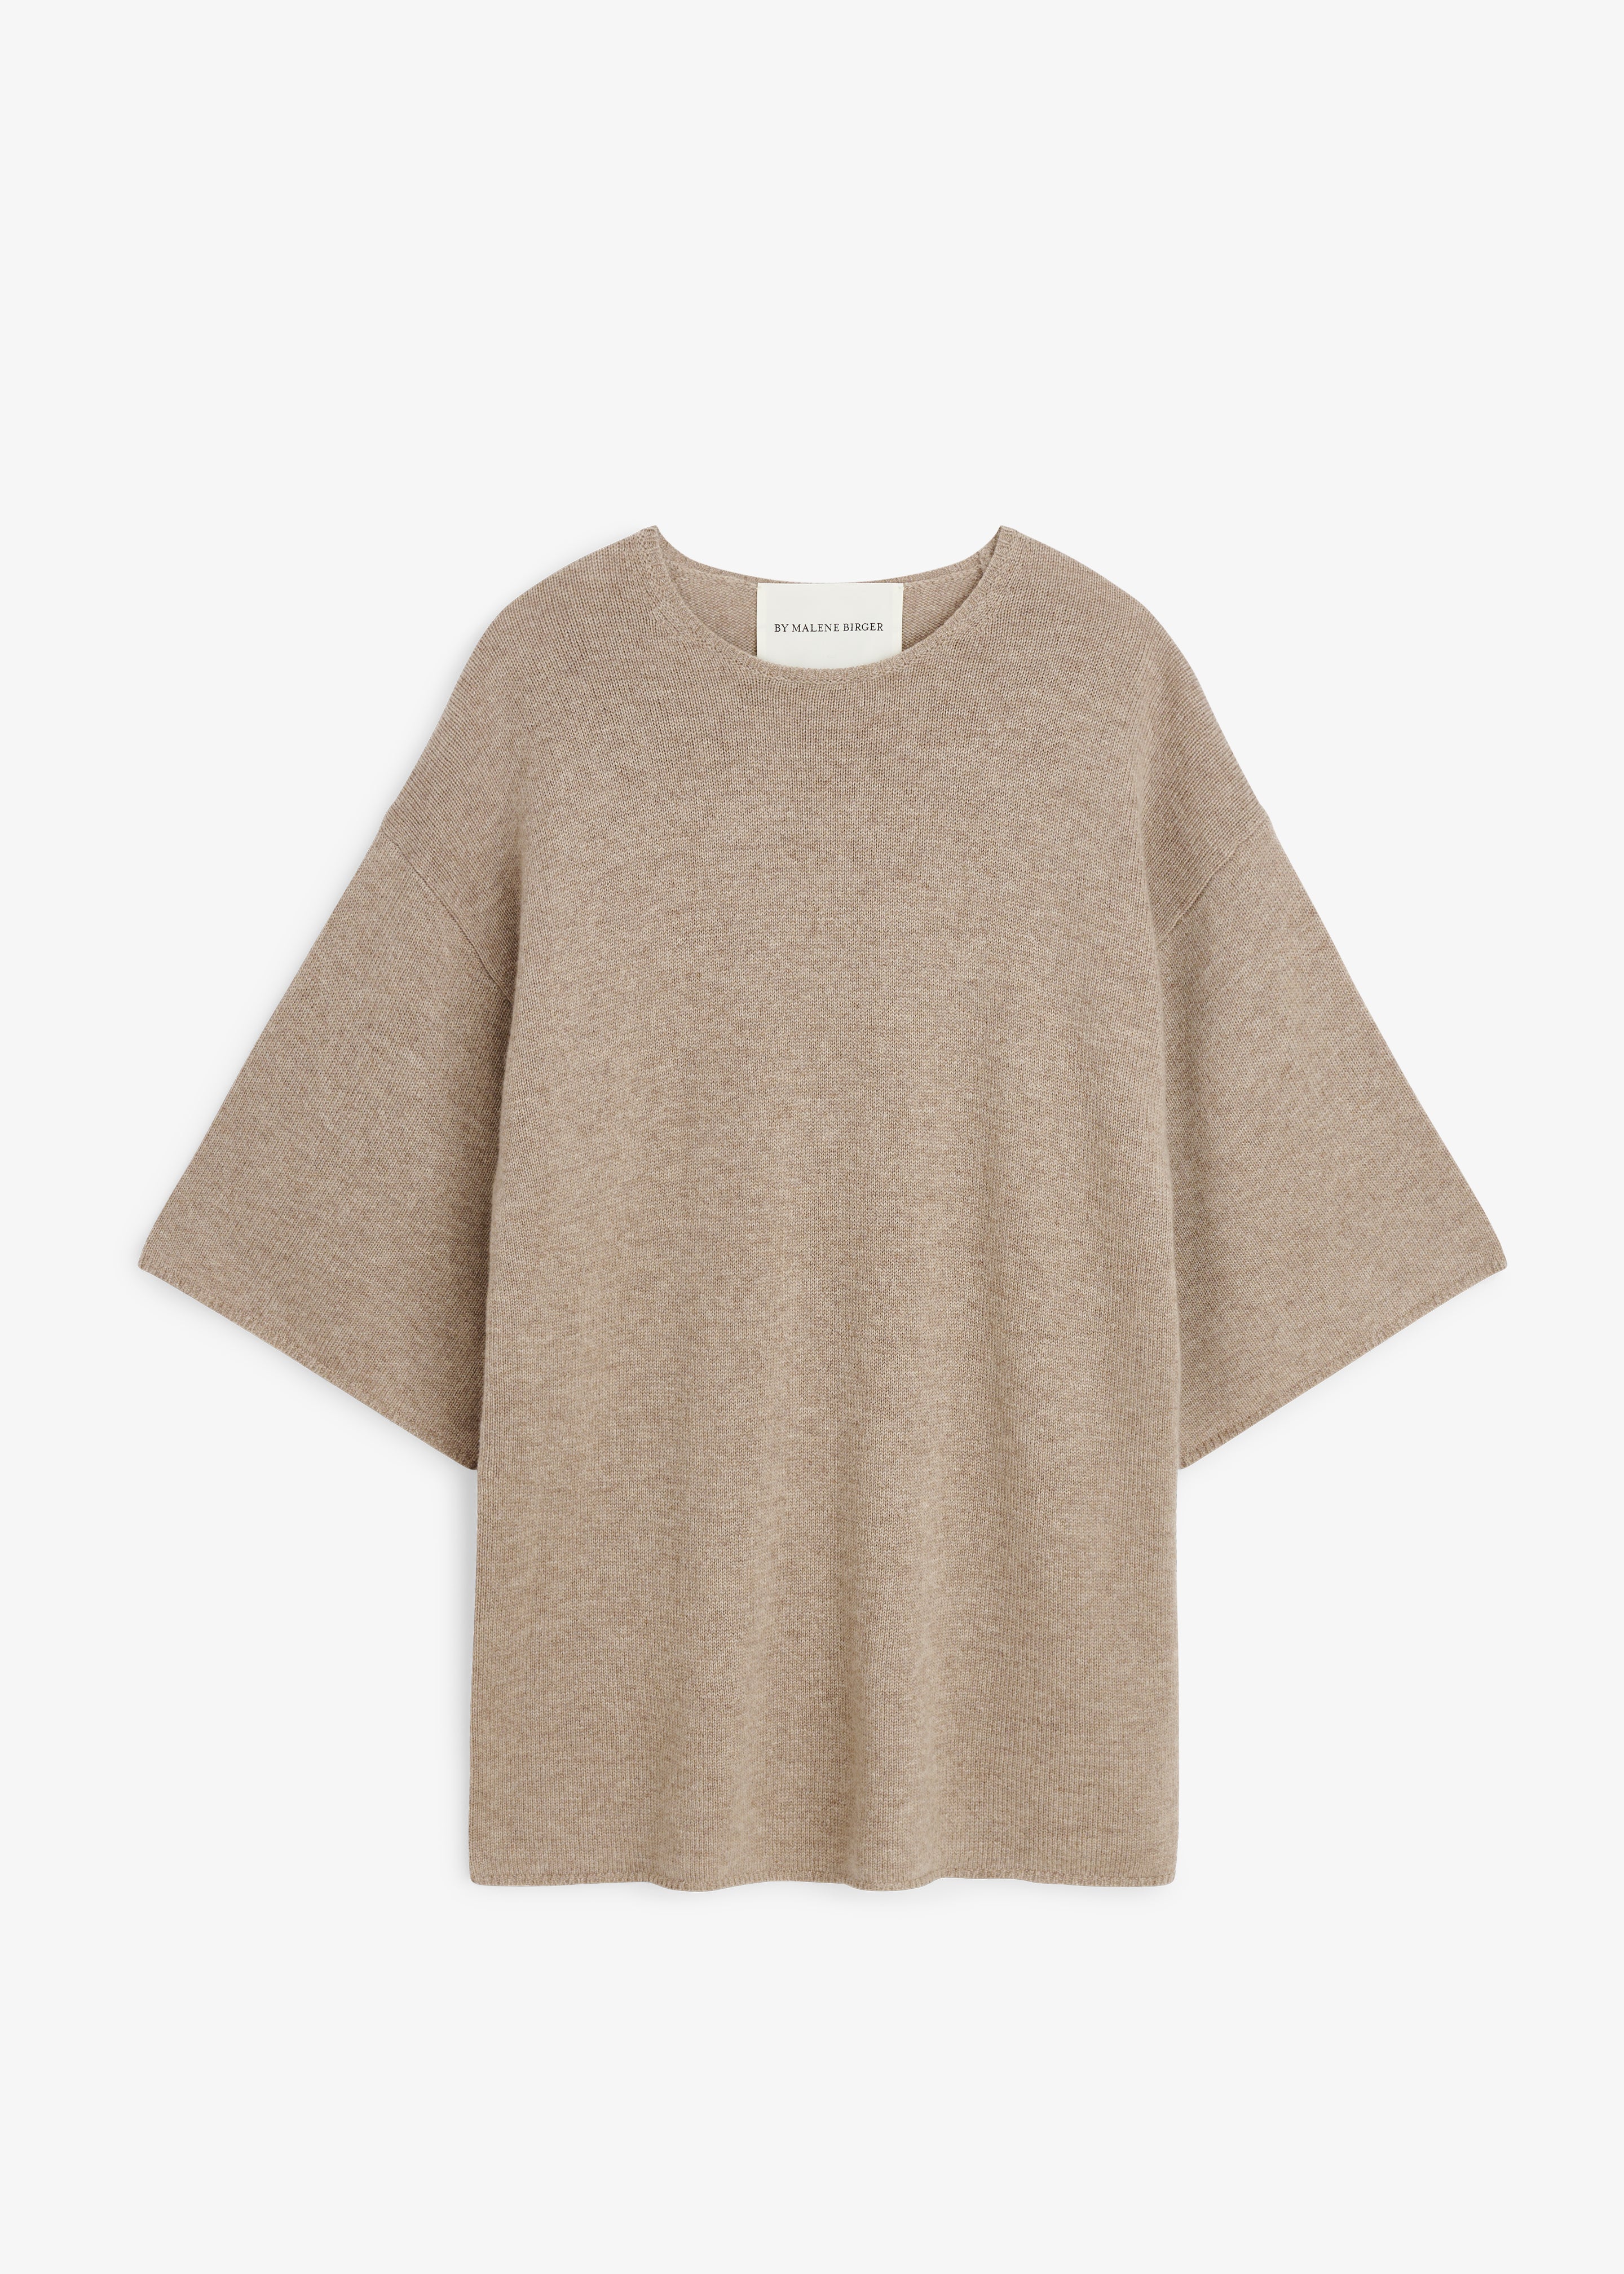 By Malene Birger Calime Sweater - Incense - 4